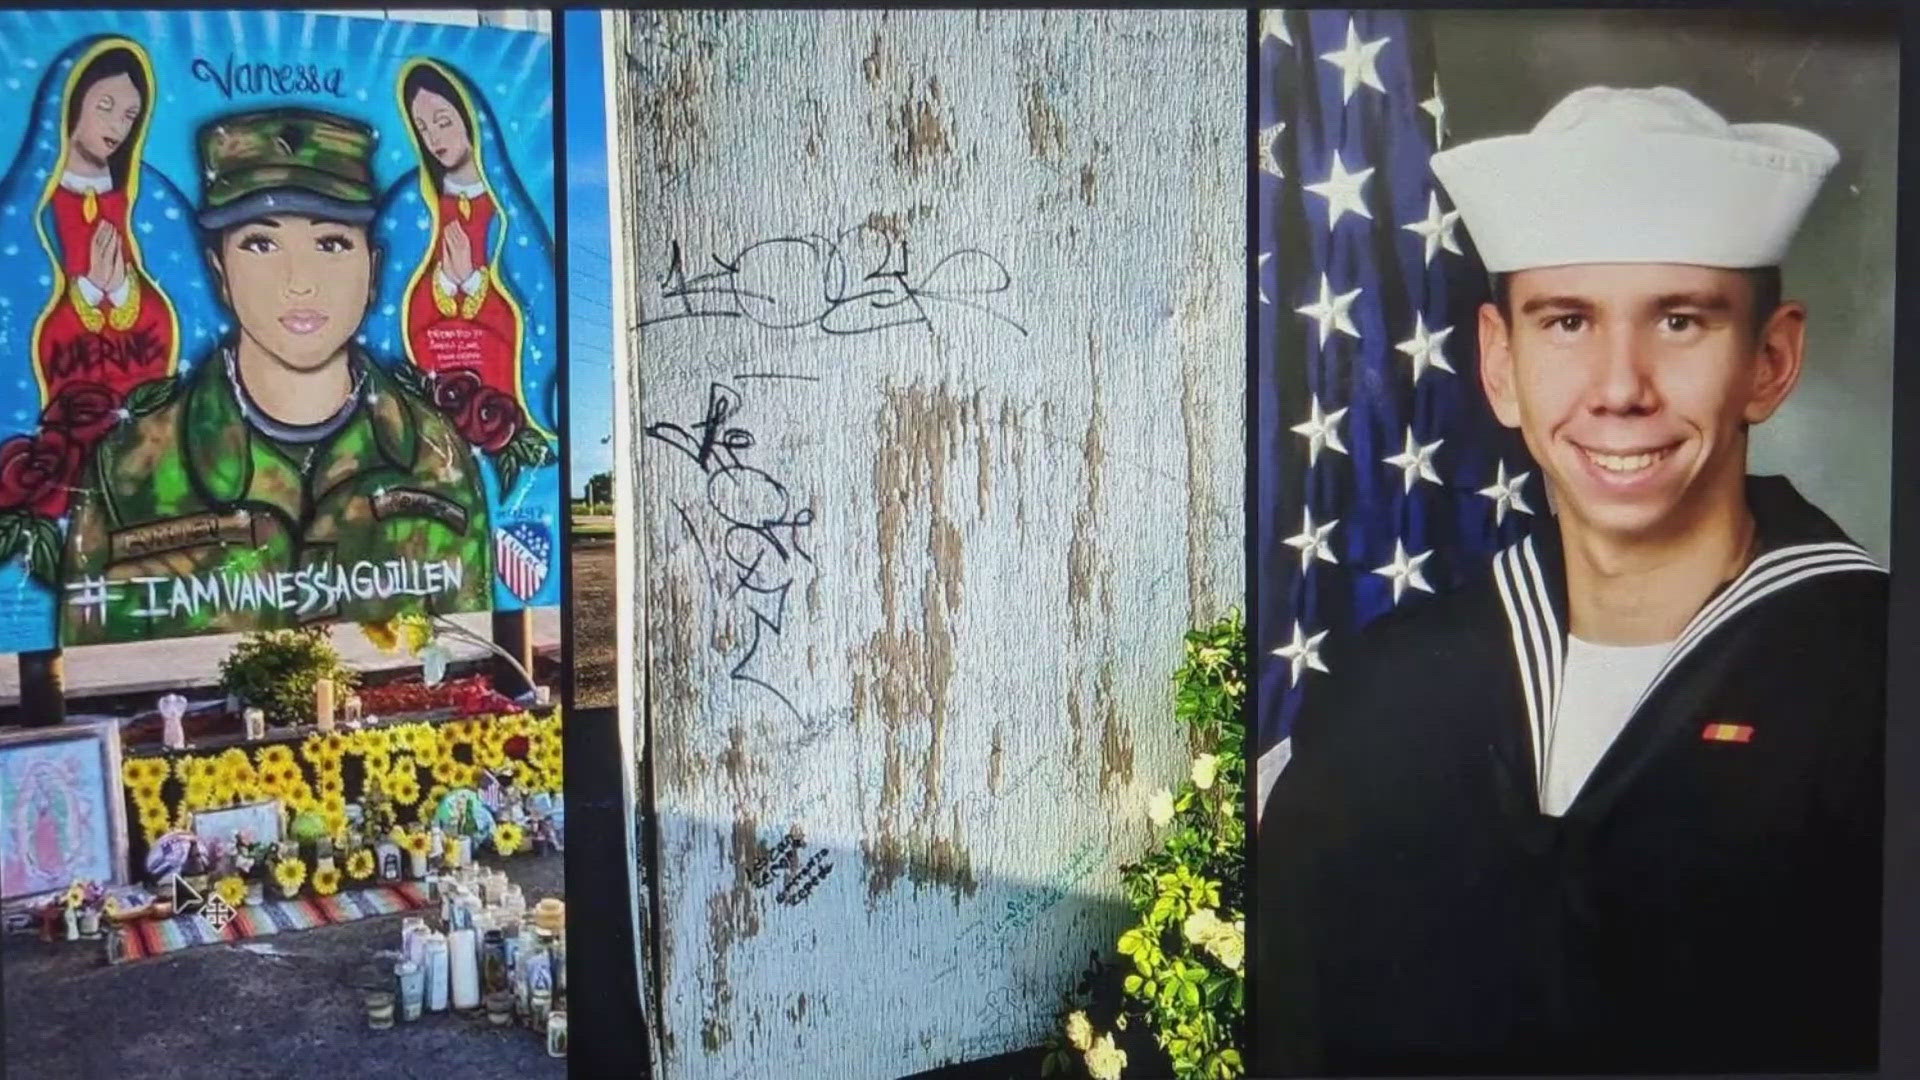 The graffiti being found on the back side of the mural sparked LULAC to add a second piece of art on the other side of the mural.